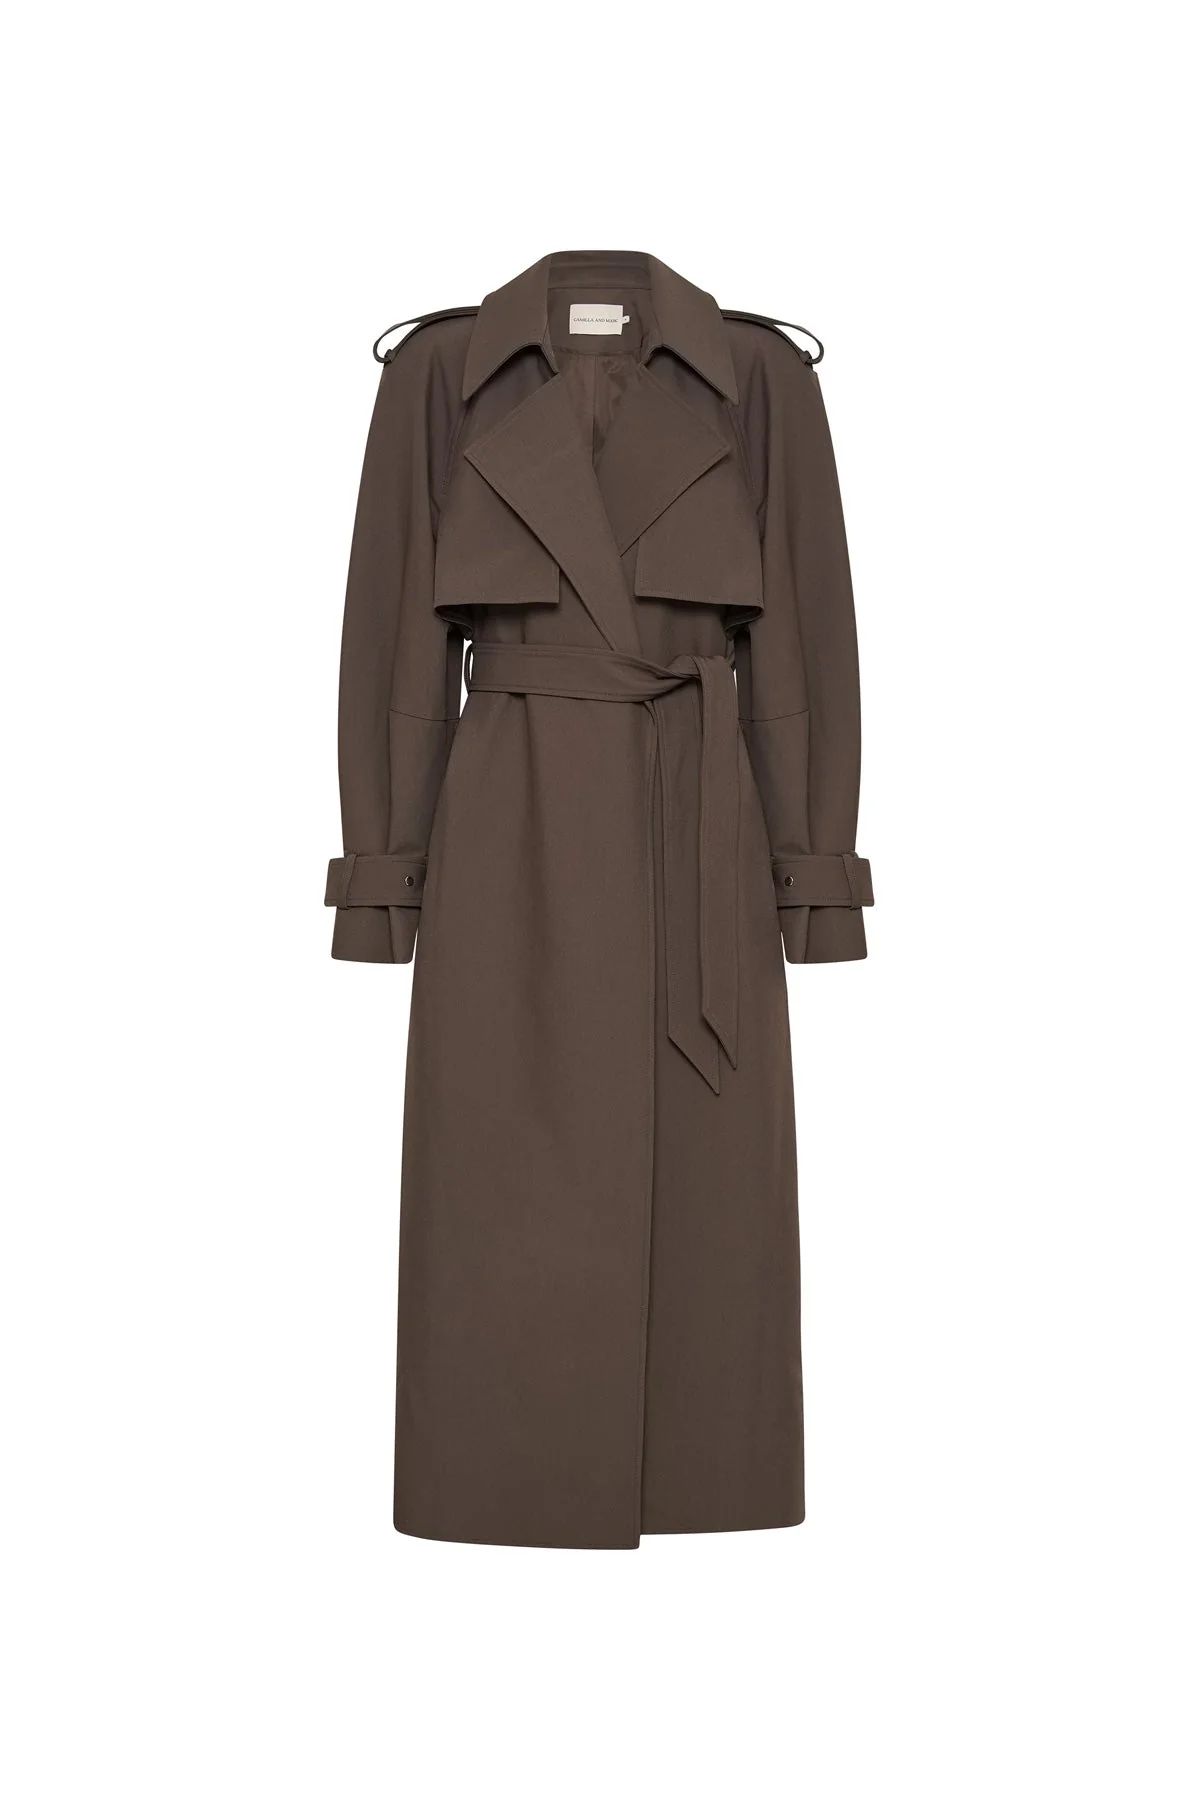 Mallory Midi Coat in Fossil Green - C&M |CAMILLA AND MARC® Official | Camilla and Marc